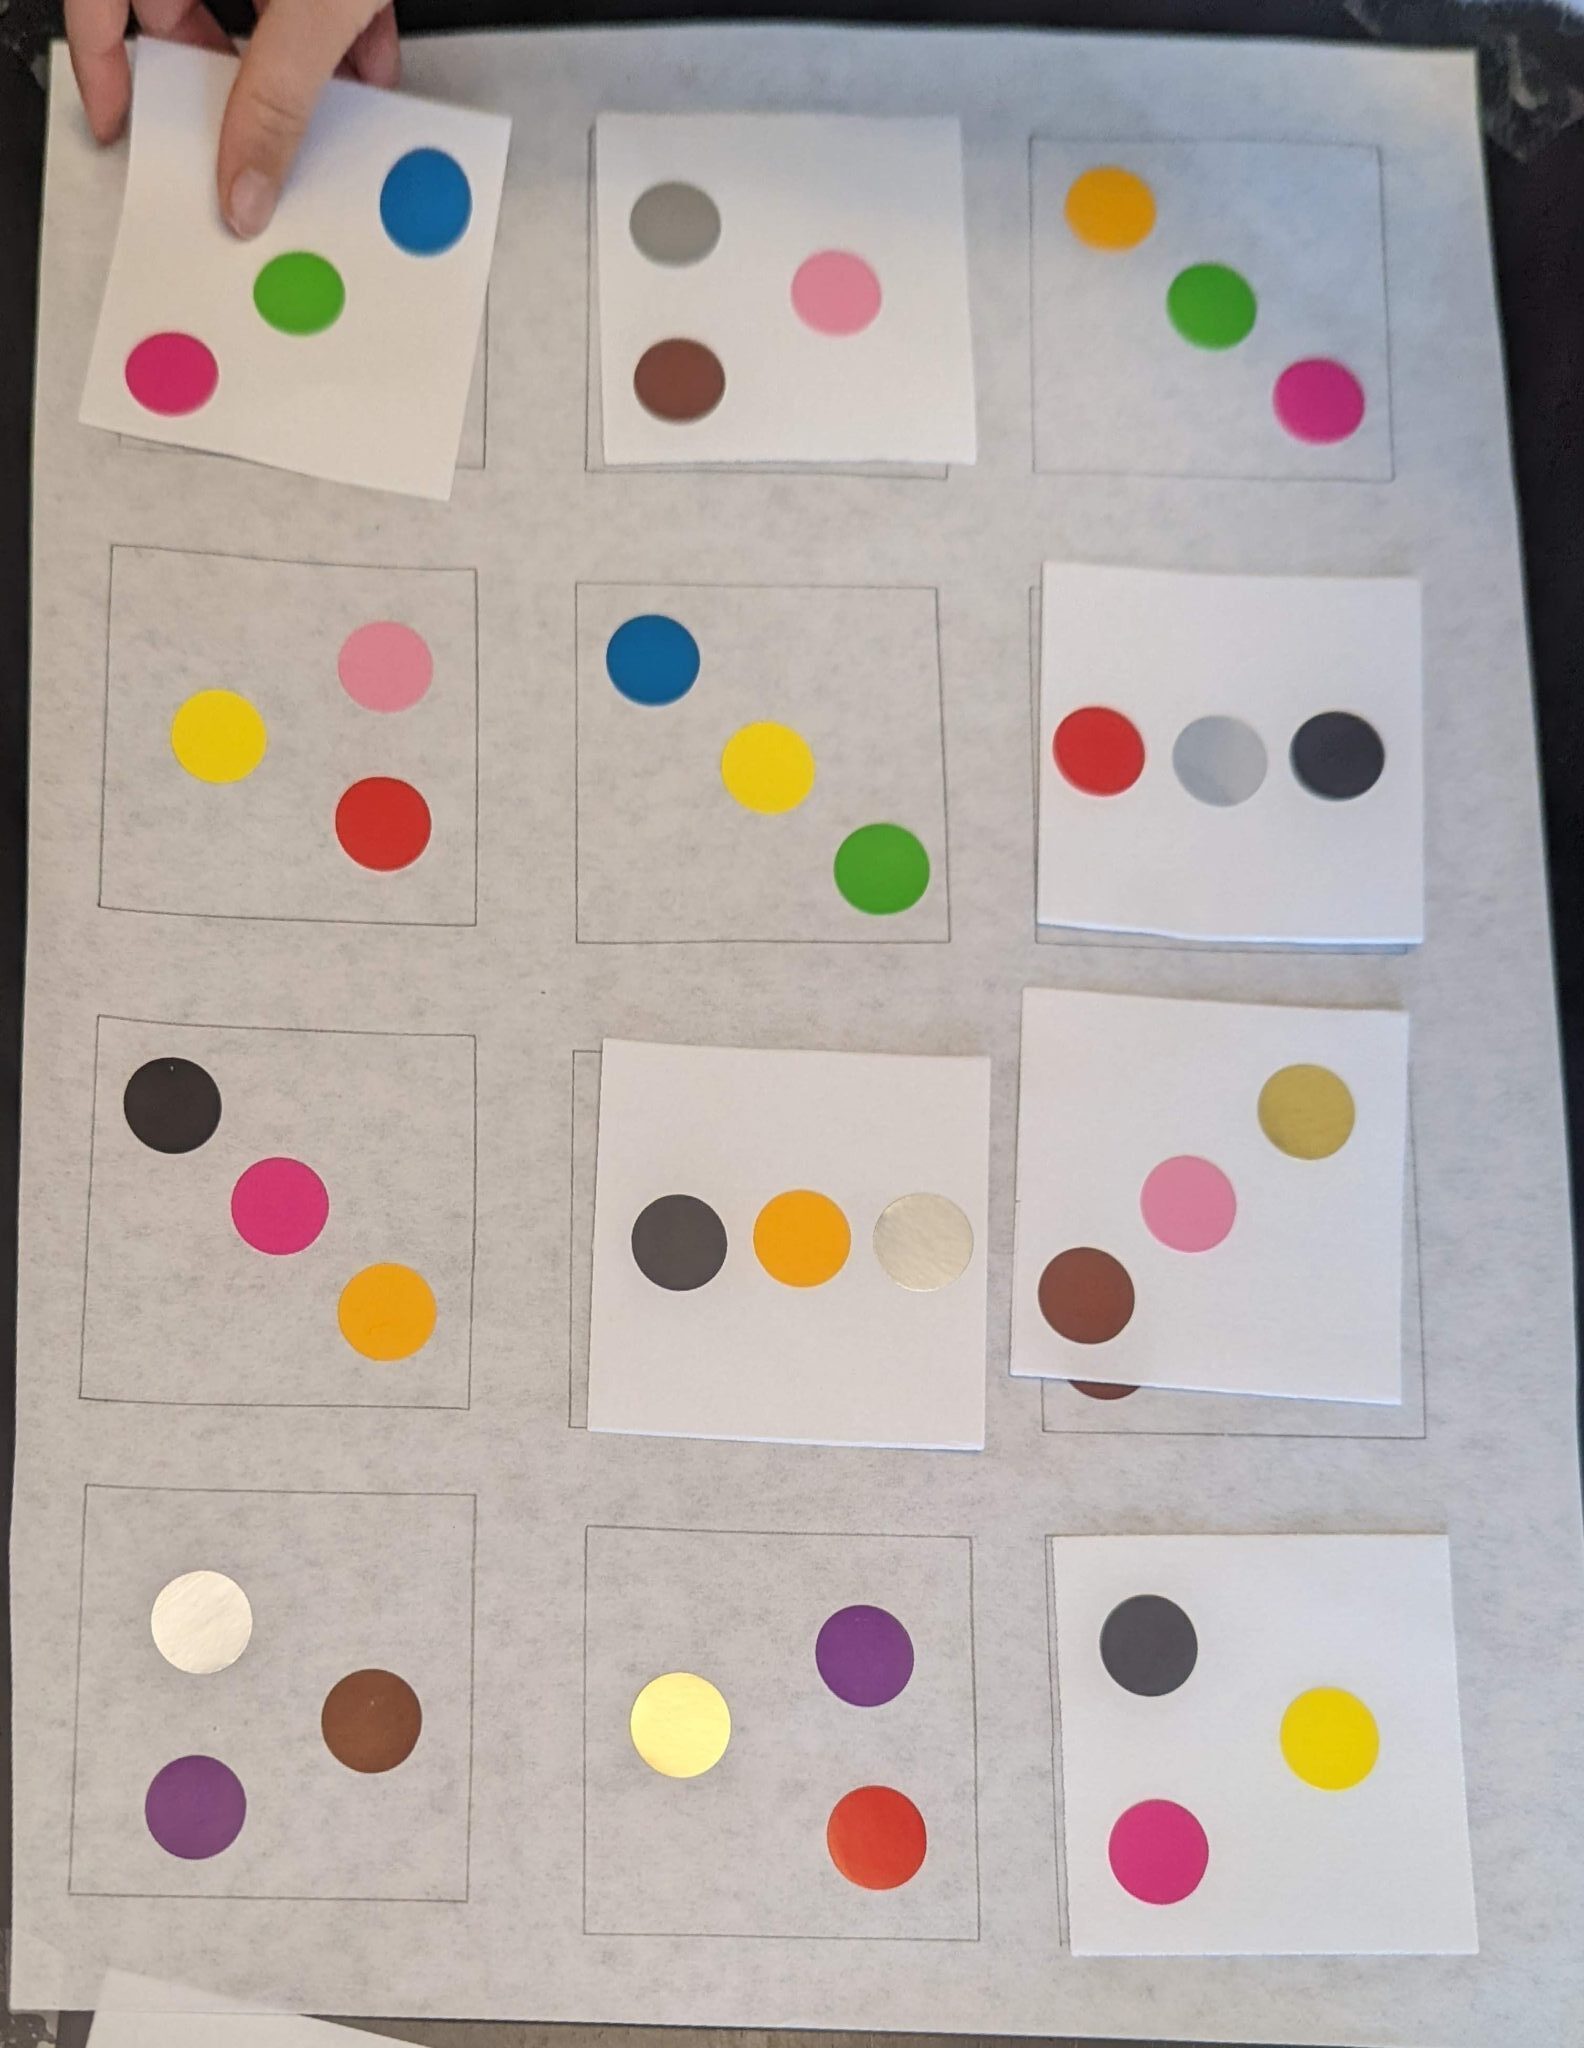 Encourage visual discrimination skills with this super simple dot sticker matching activity that can be used over and over again! Enjoy!